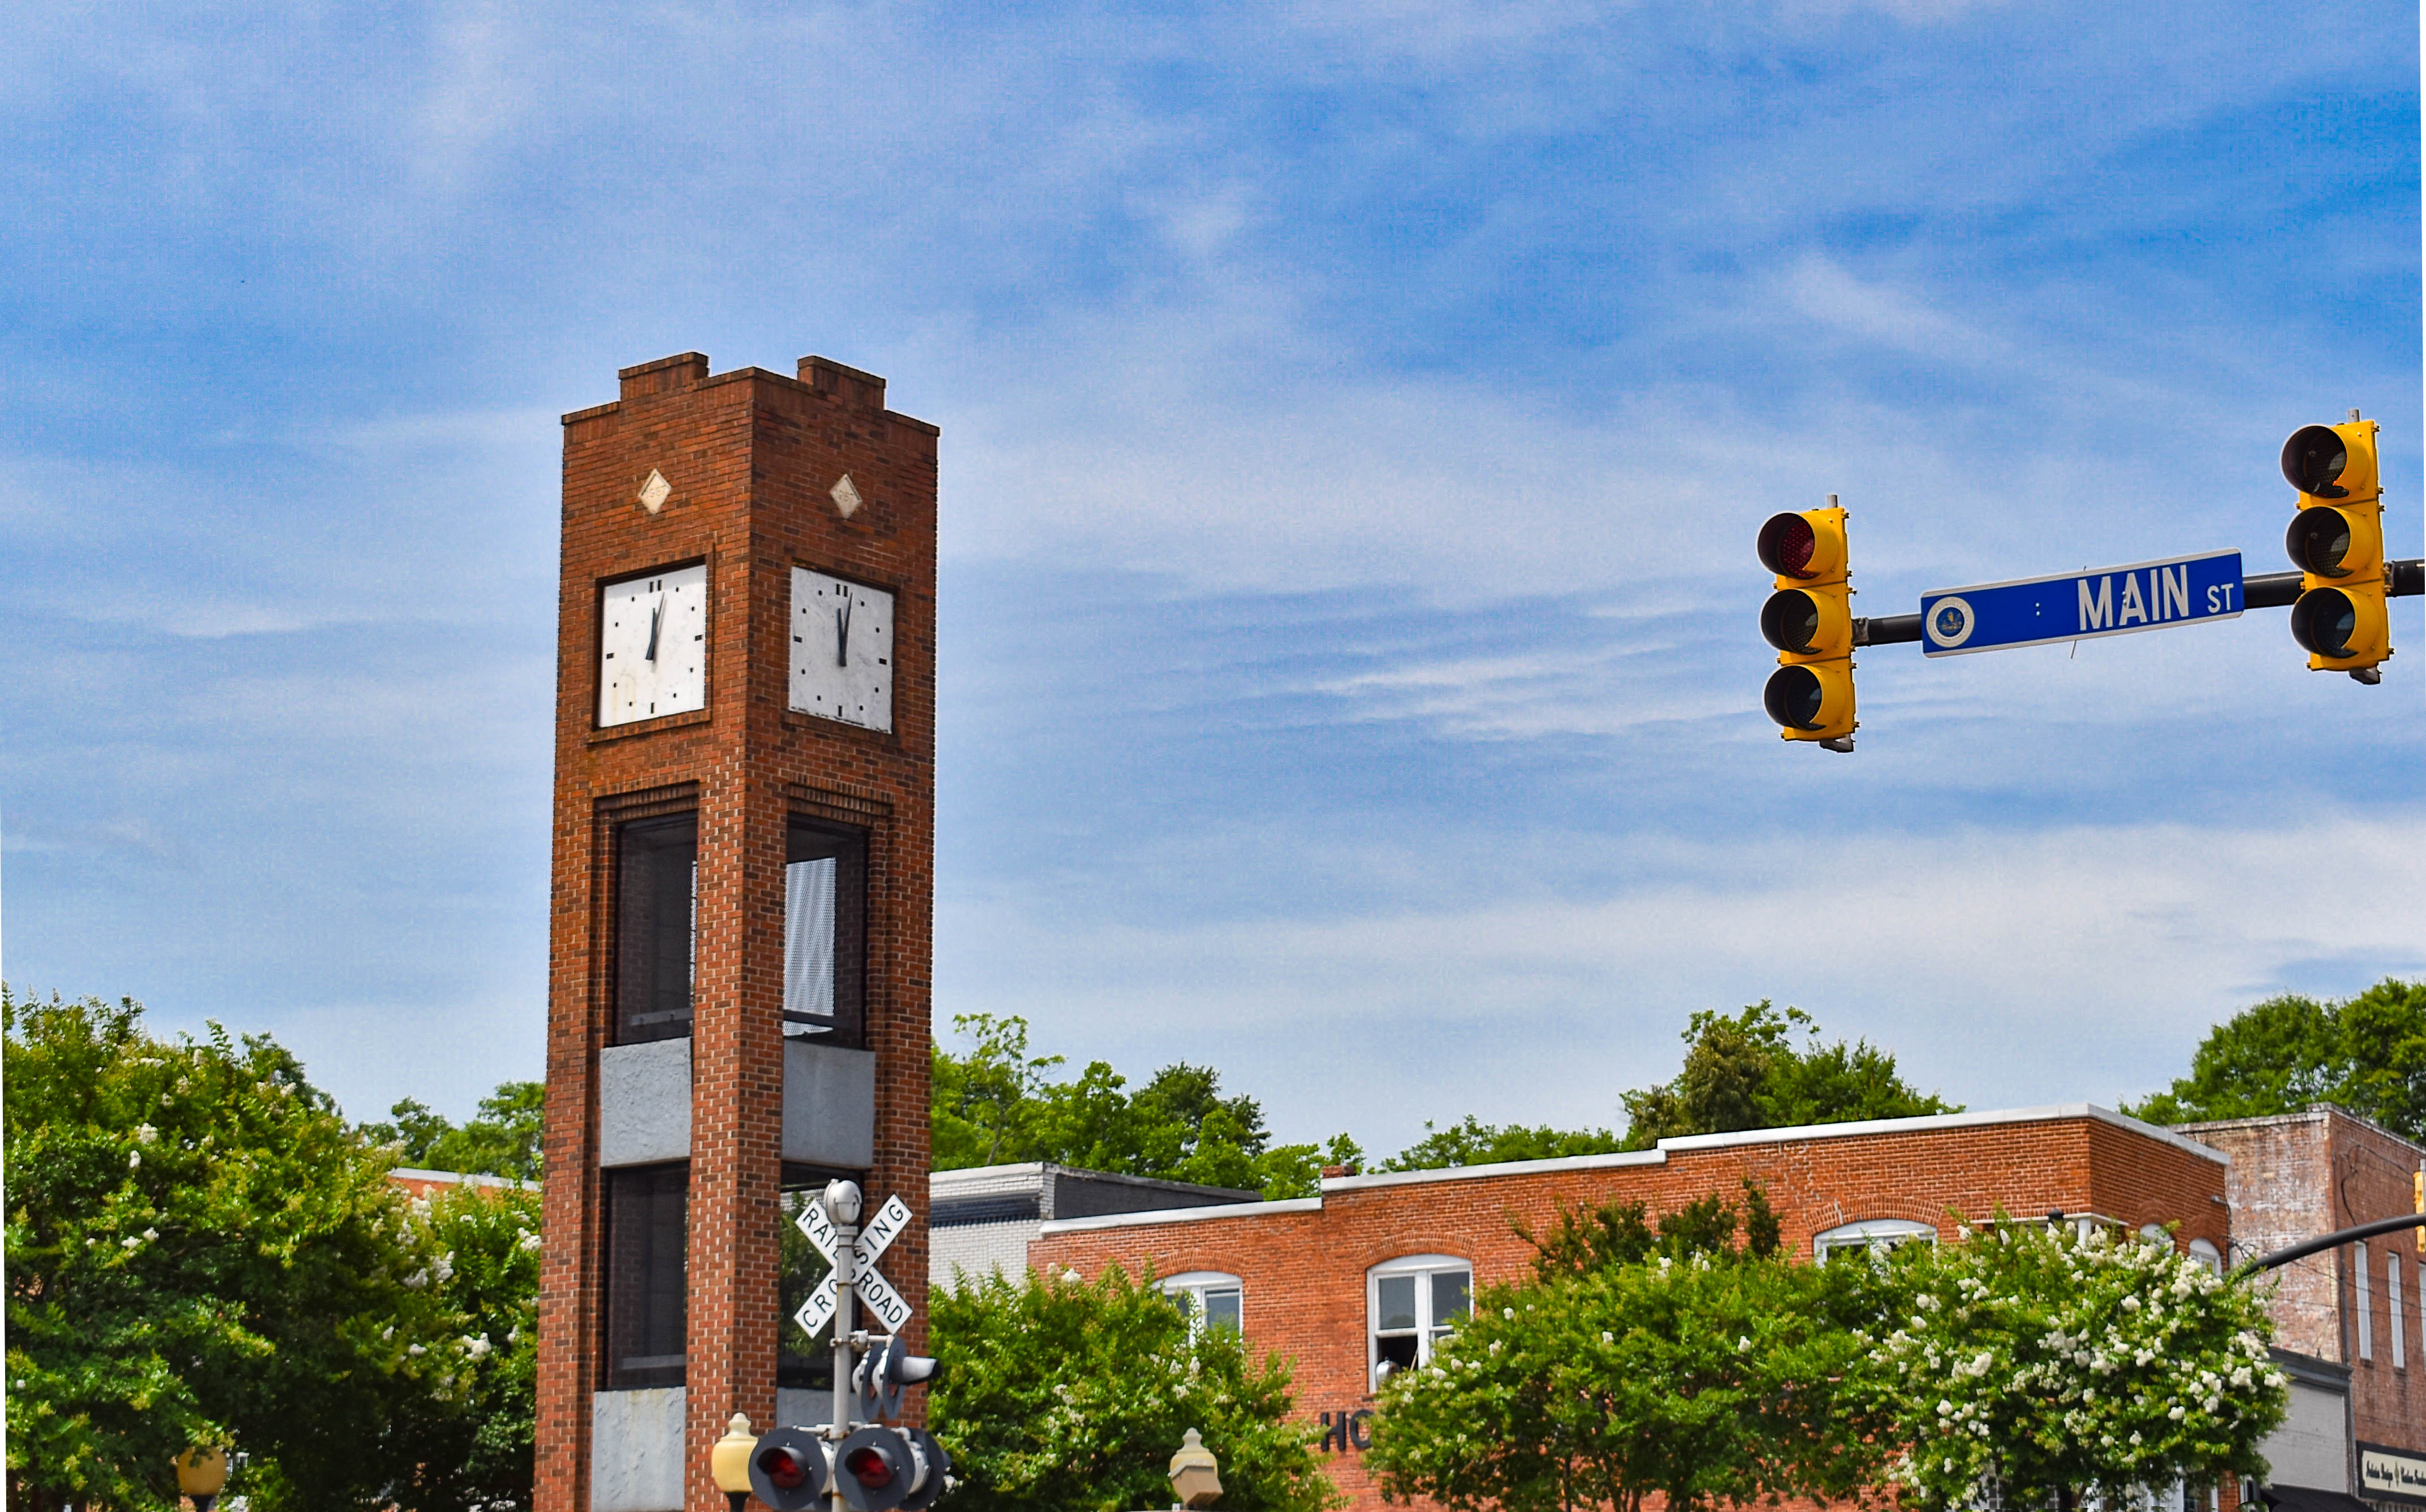 The Clock Tower on South Main Street in Simpsonville was donated to the City by former Mayor Ralph Hendricks in 1987.